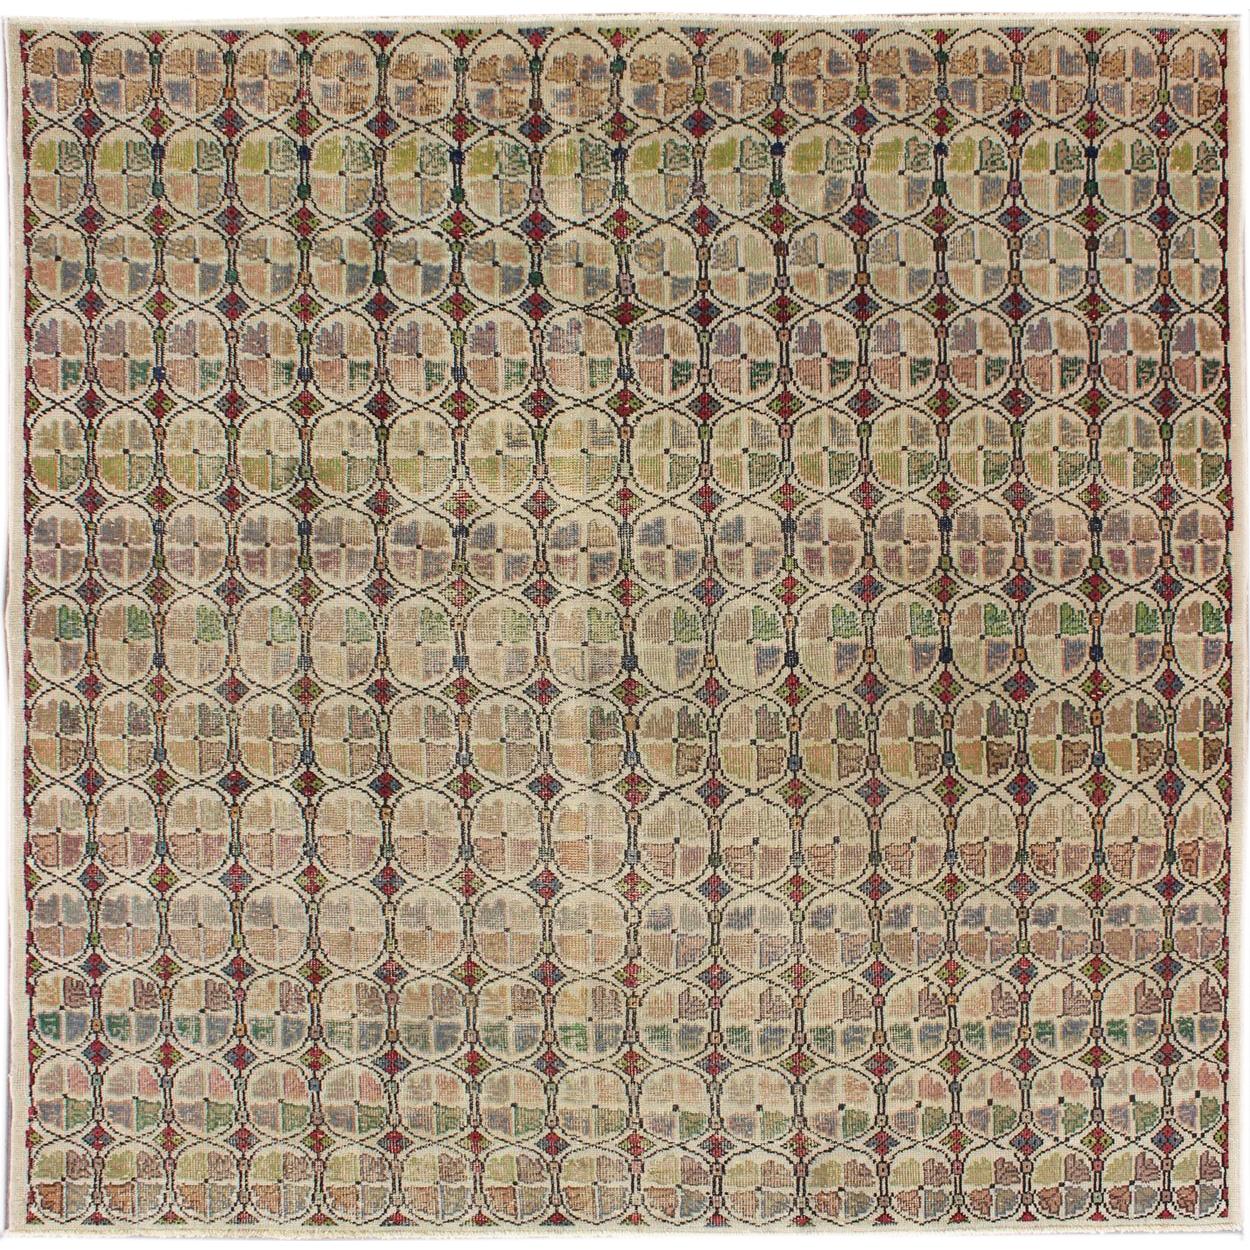 Squared Size Mid-Century Modern Rug with Circular Pattern in Variety of Colors